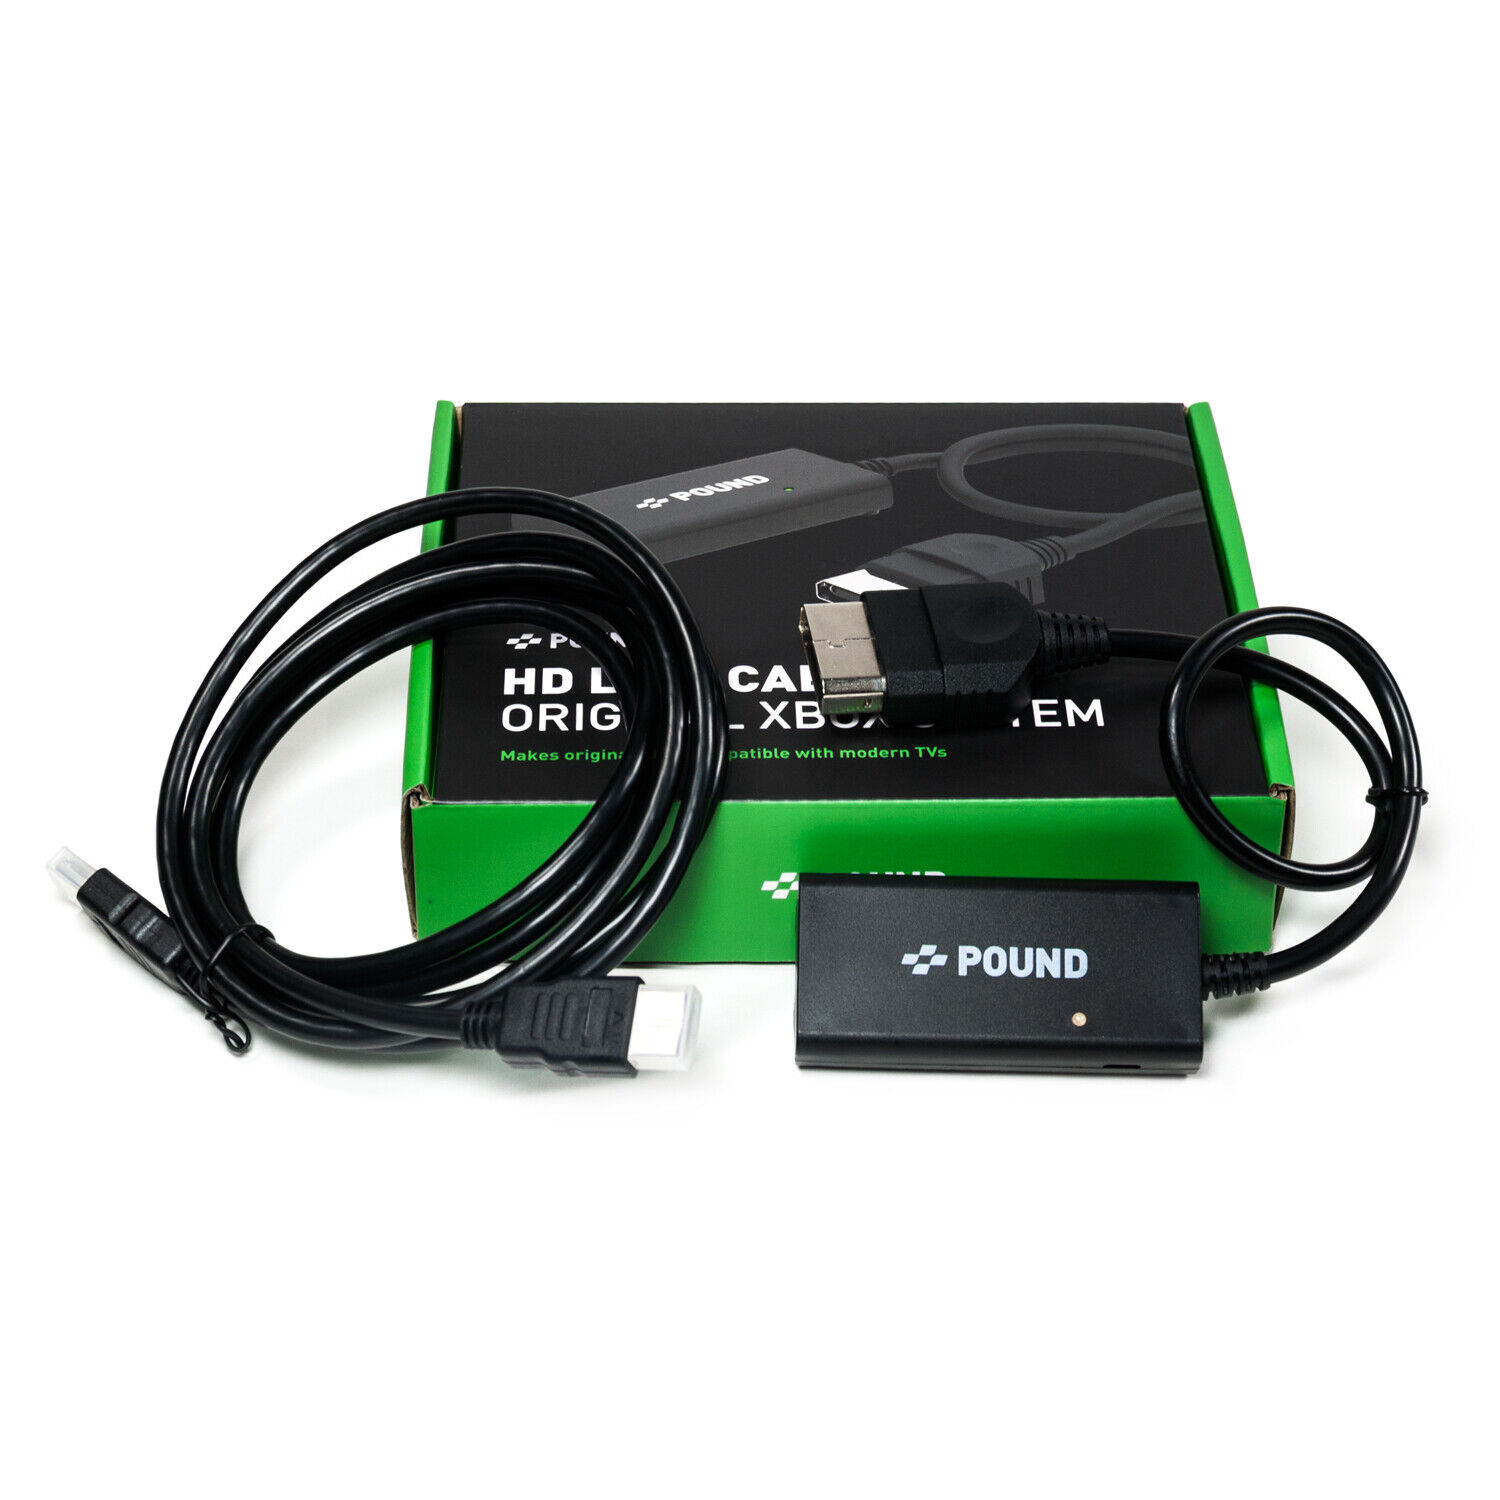 [OFFICIAL] Pound Technology HD Link Cable for the Original Xbox